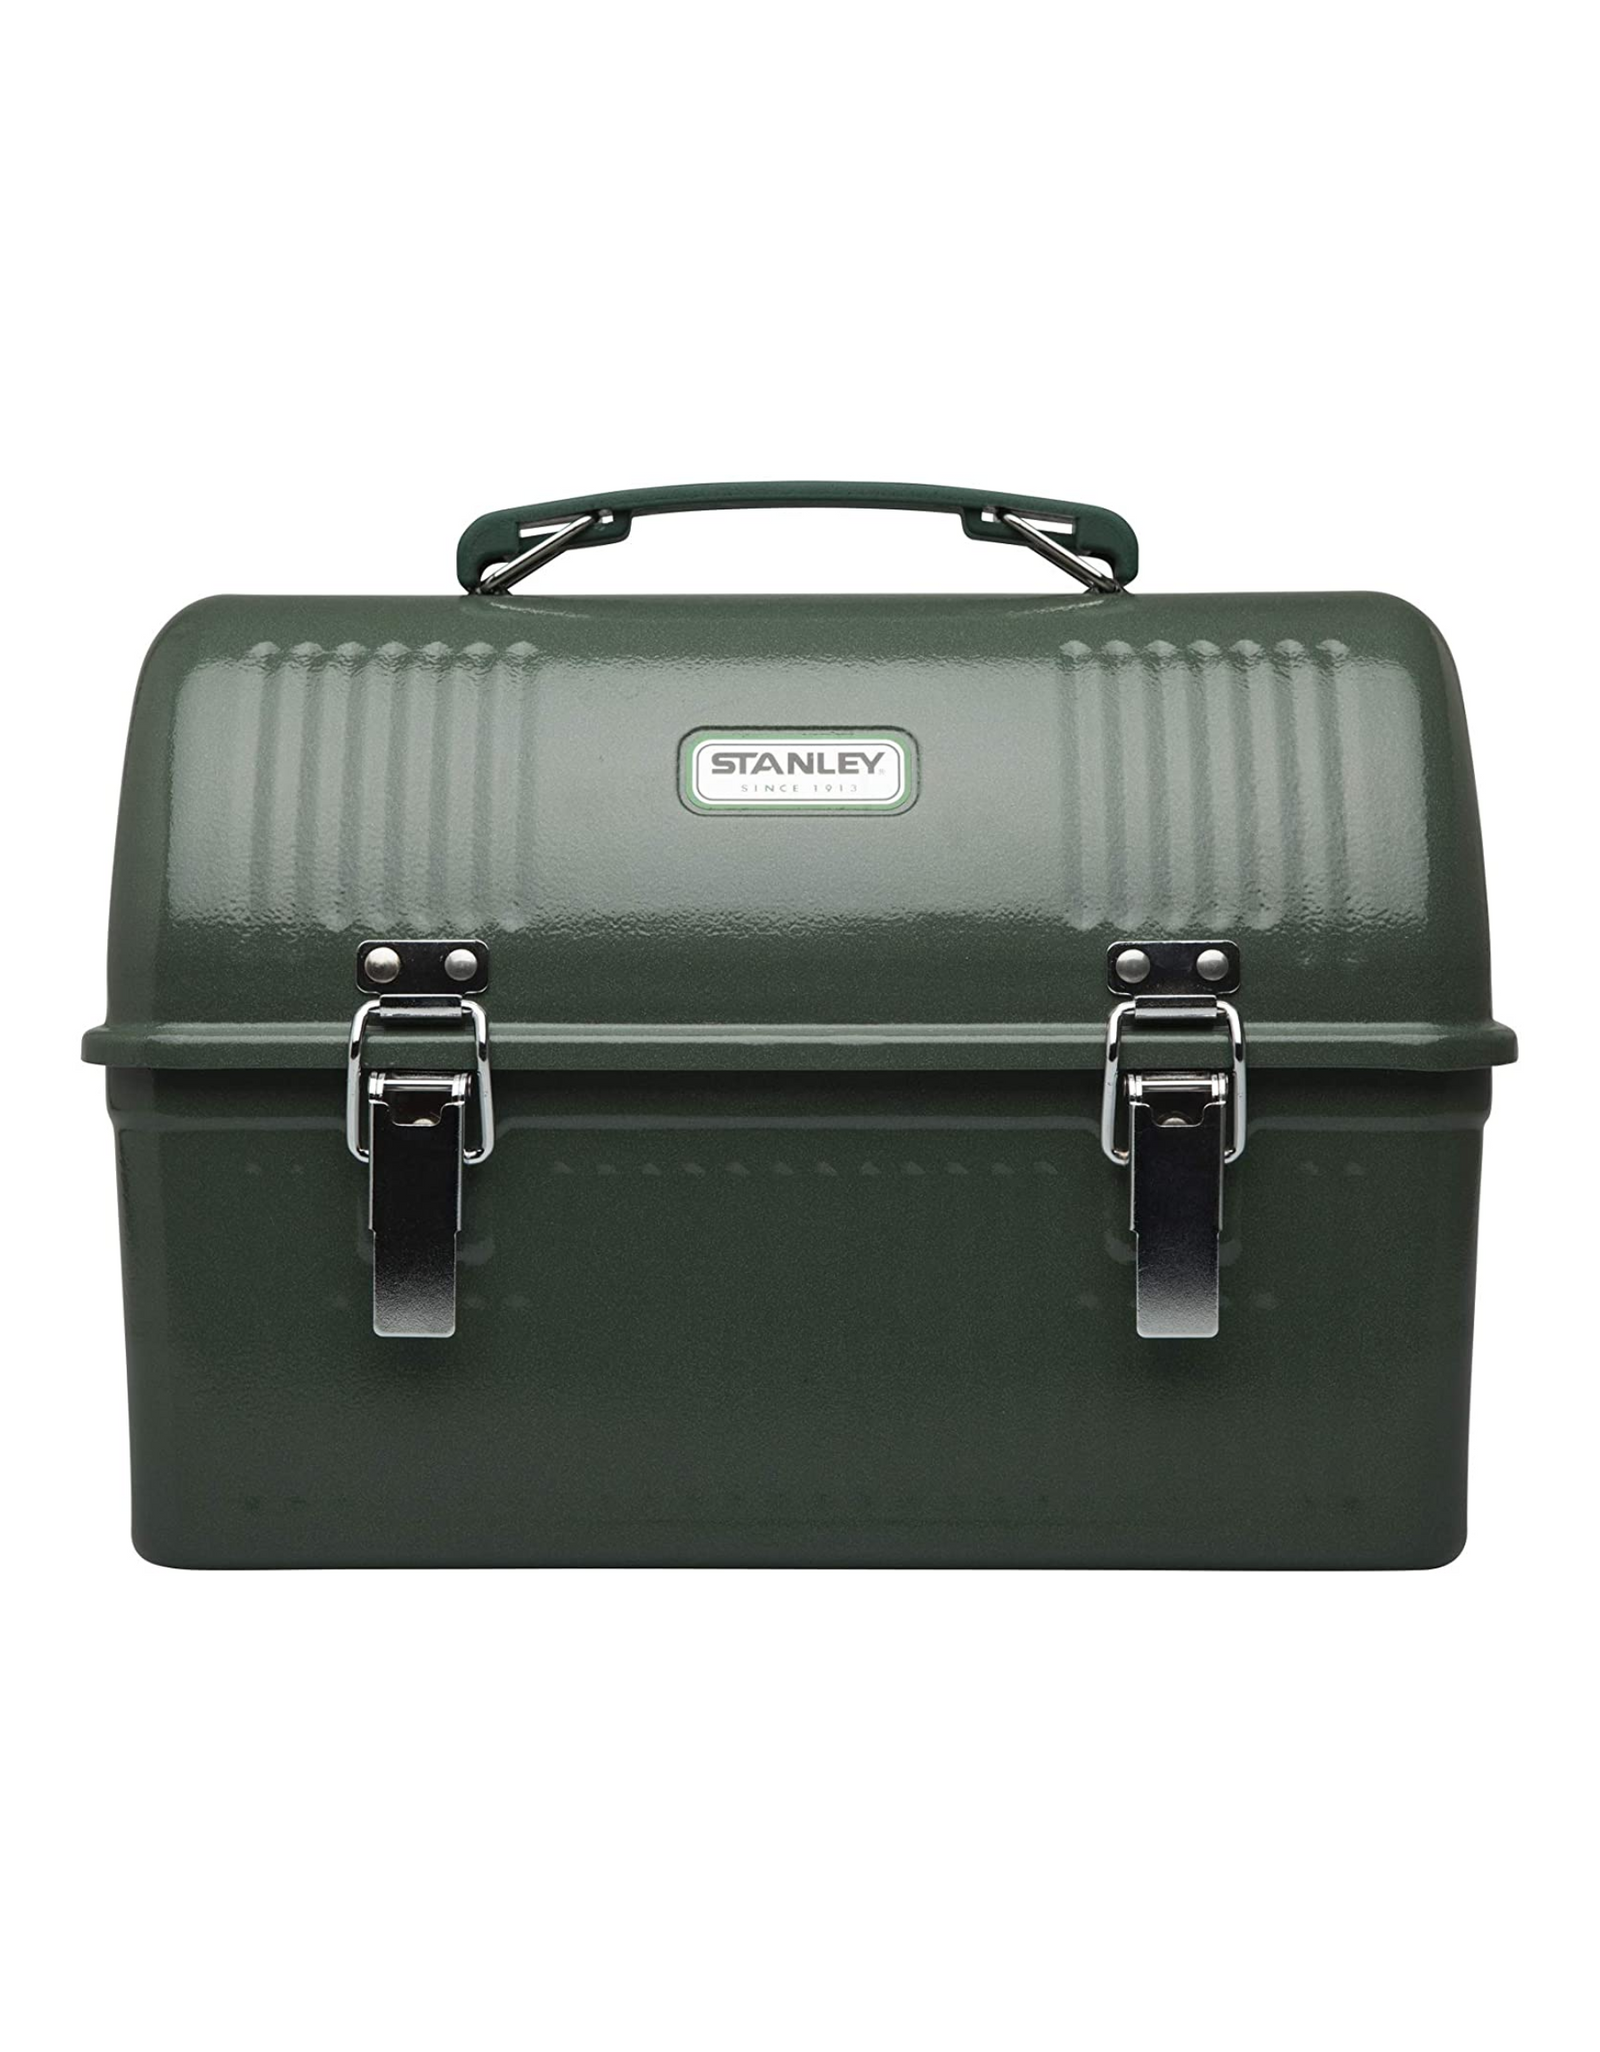 Stanley Classic 10qt Lunch Box, Large Lunchbox, Fits Meals, Containers